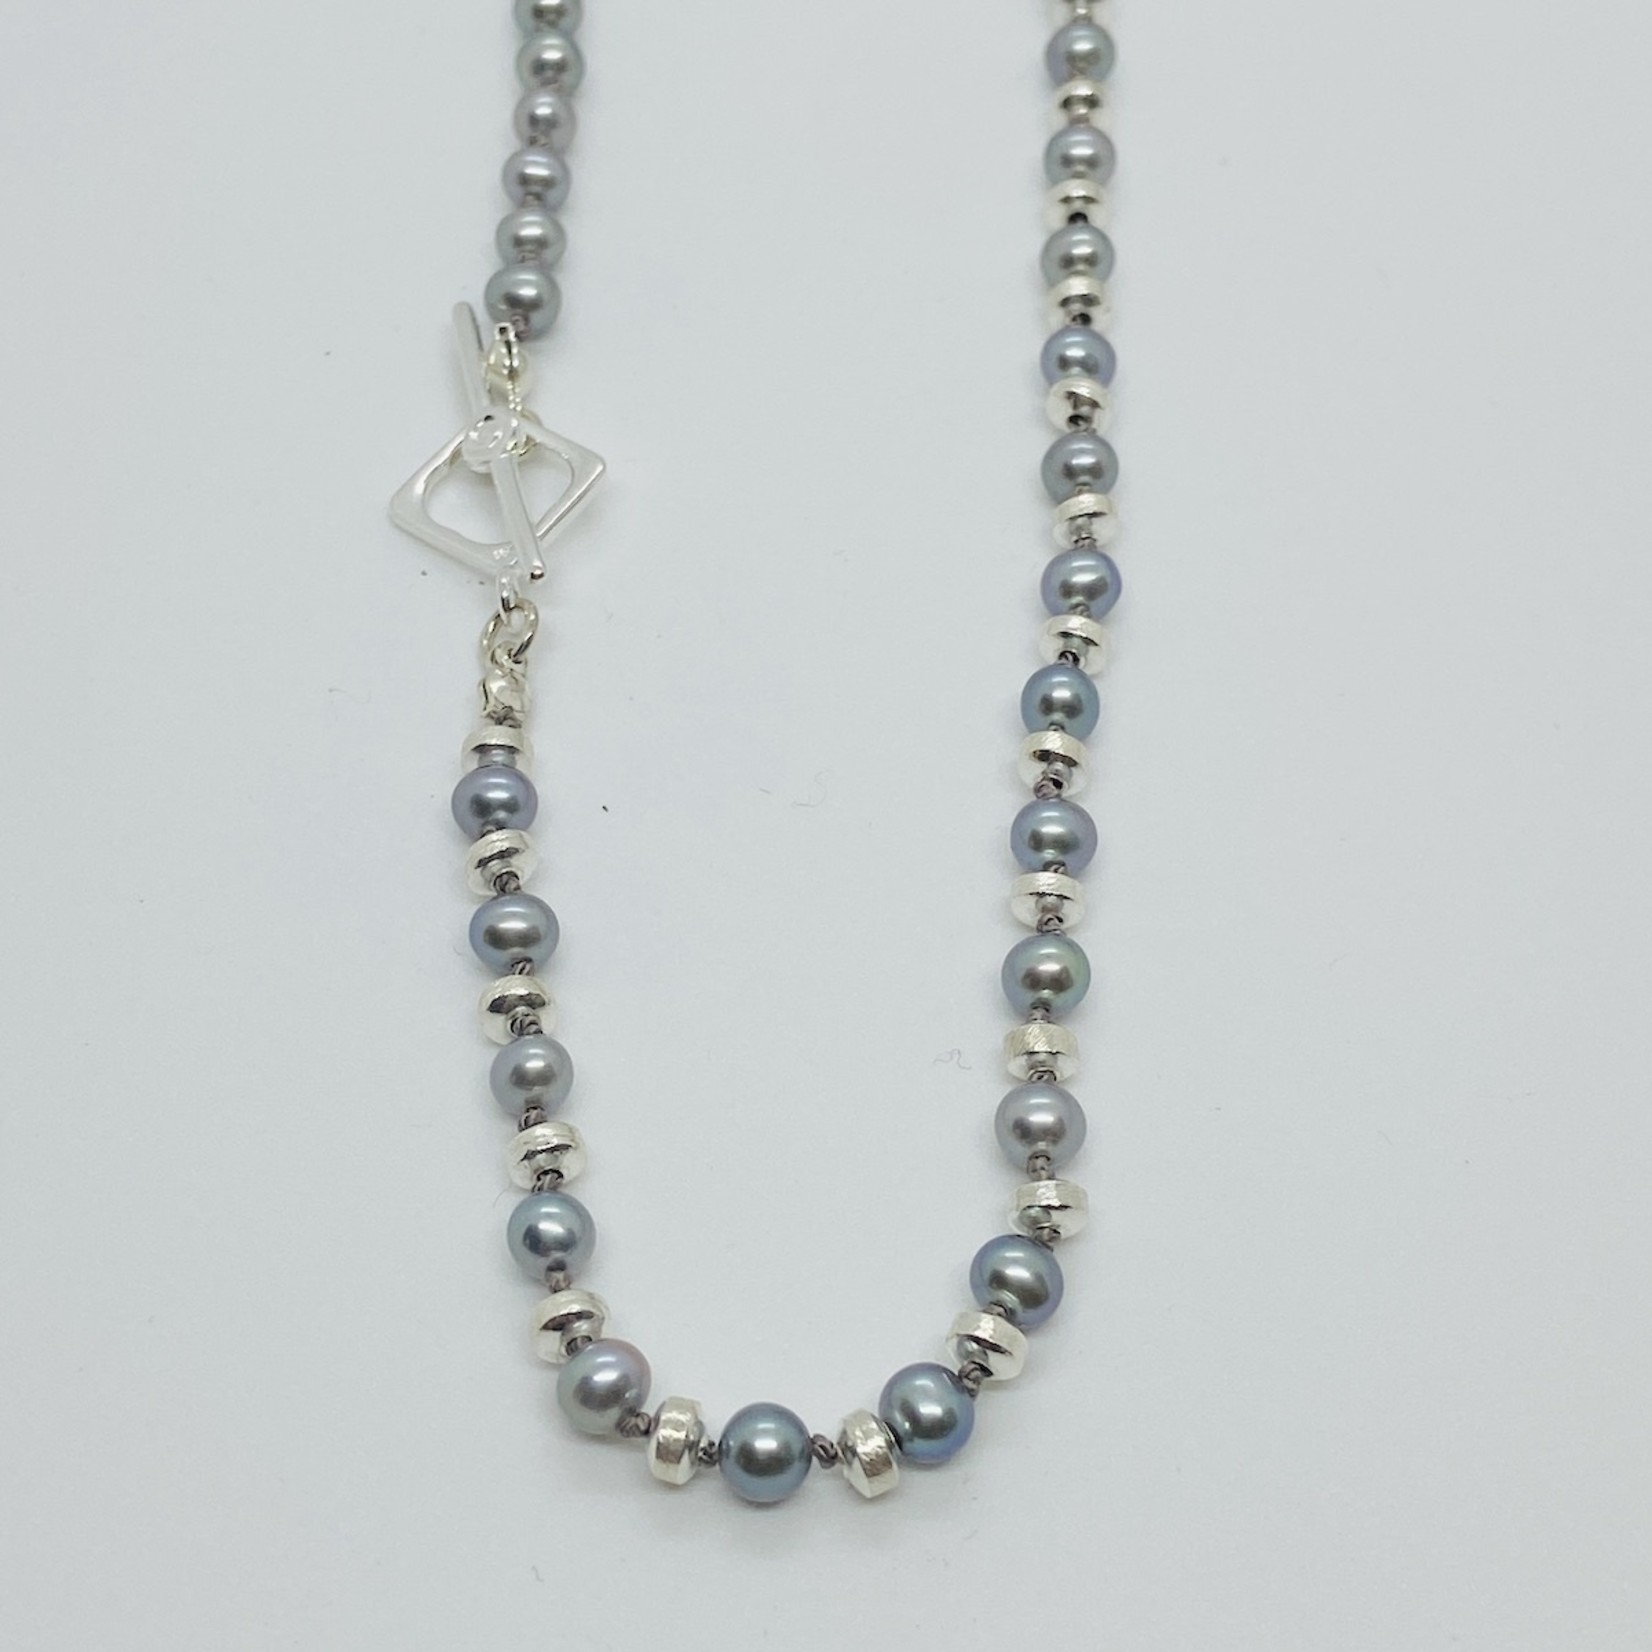 EVANKNOX Handmade Necklace with silver pearls, silver saucers knotted on grey silk